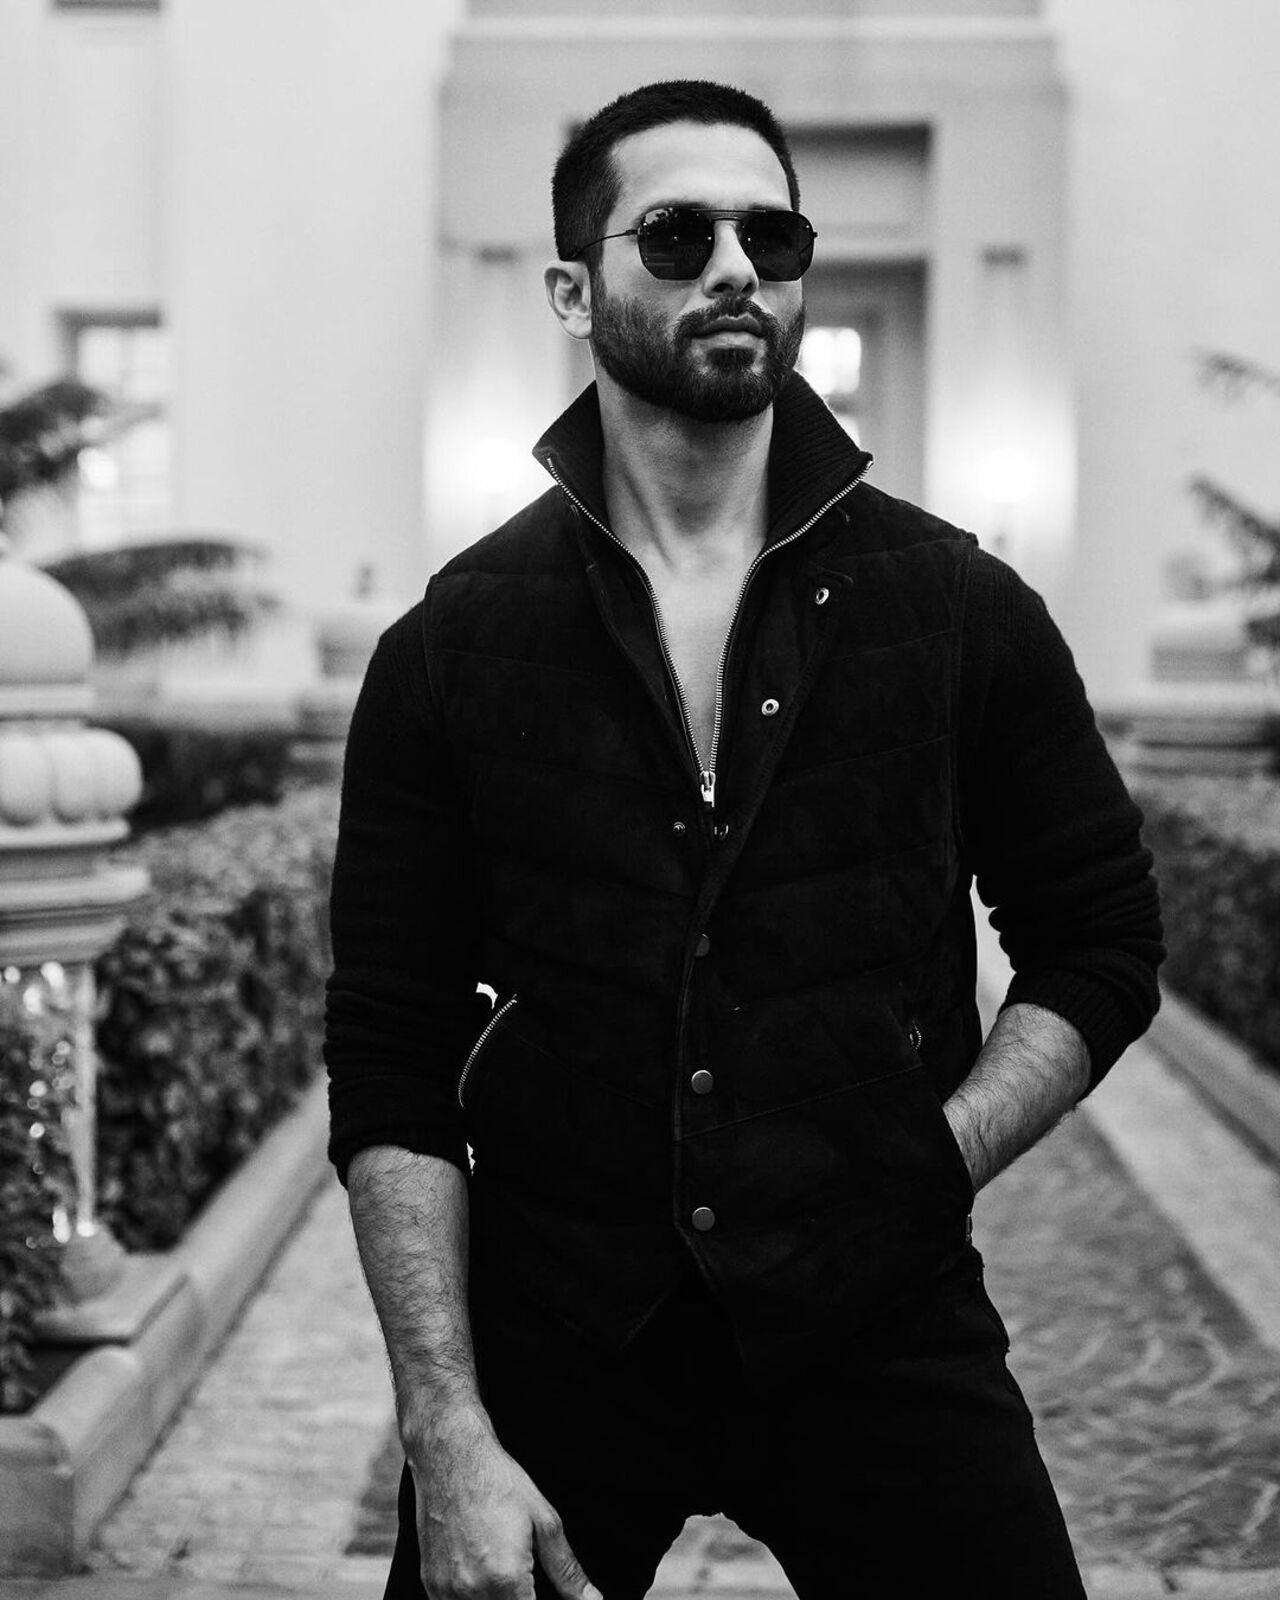 Shahid Kapoor rocks this zipper jacket with black pants and boots